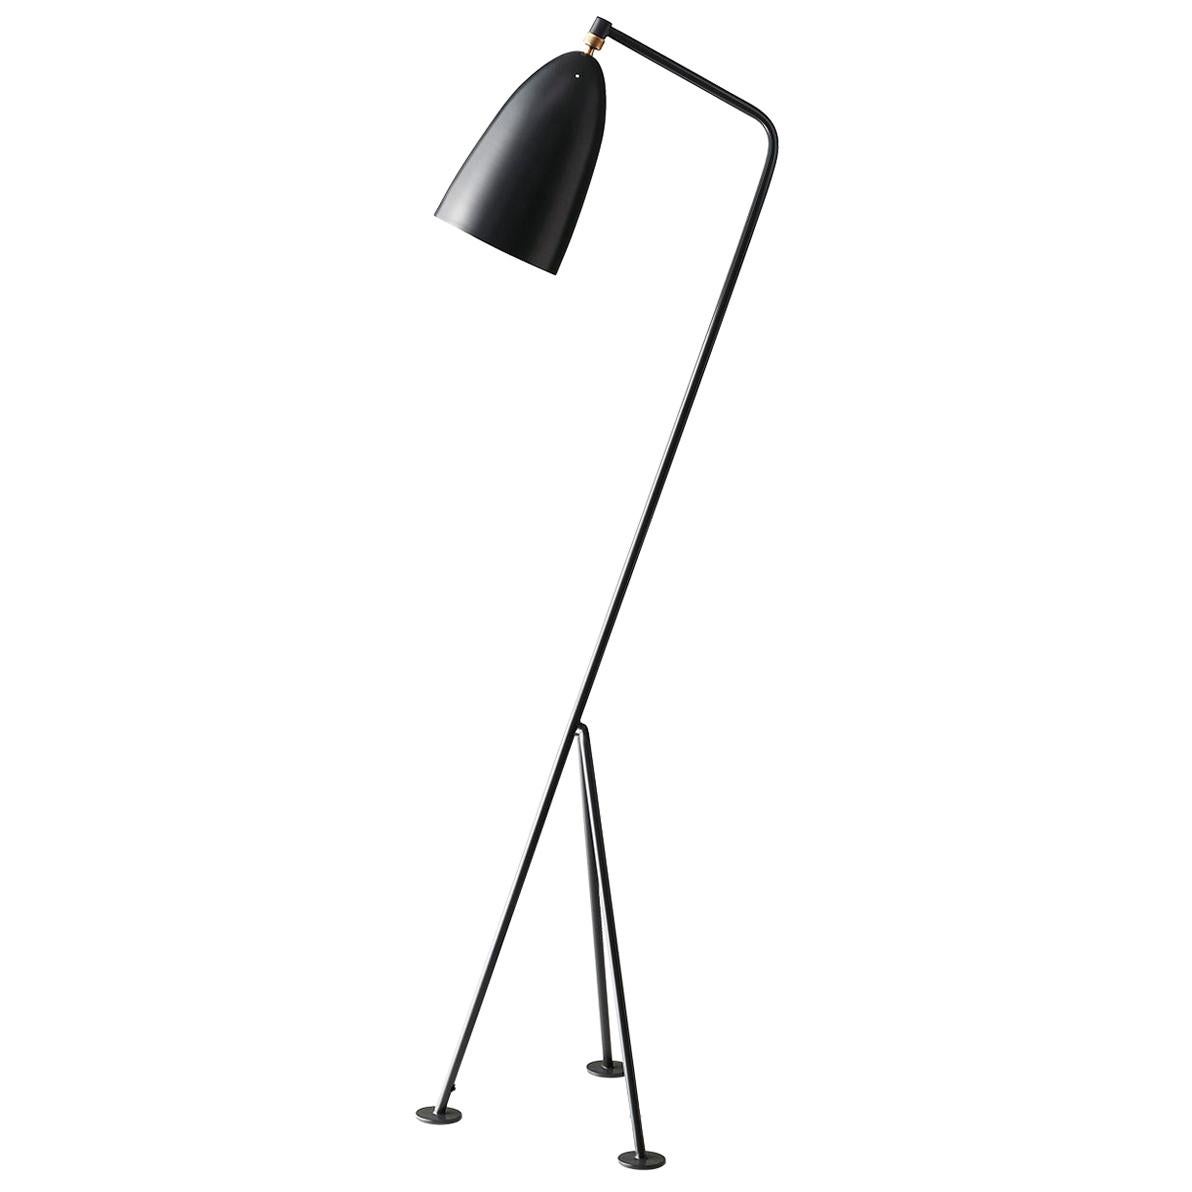 The iconic Grasshopper Floor Lamp was first produced in 1947 by the feminine pioneer Greta M. Grossman. The unique tripod stand of the Grasshopper Floor Lamp is tilted backward and gives the impression that the lamp is somehow alive and stalking its